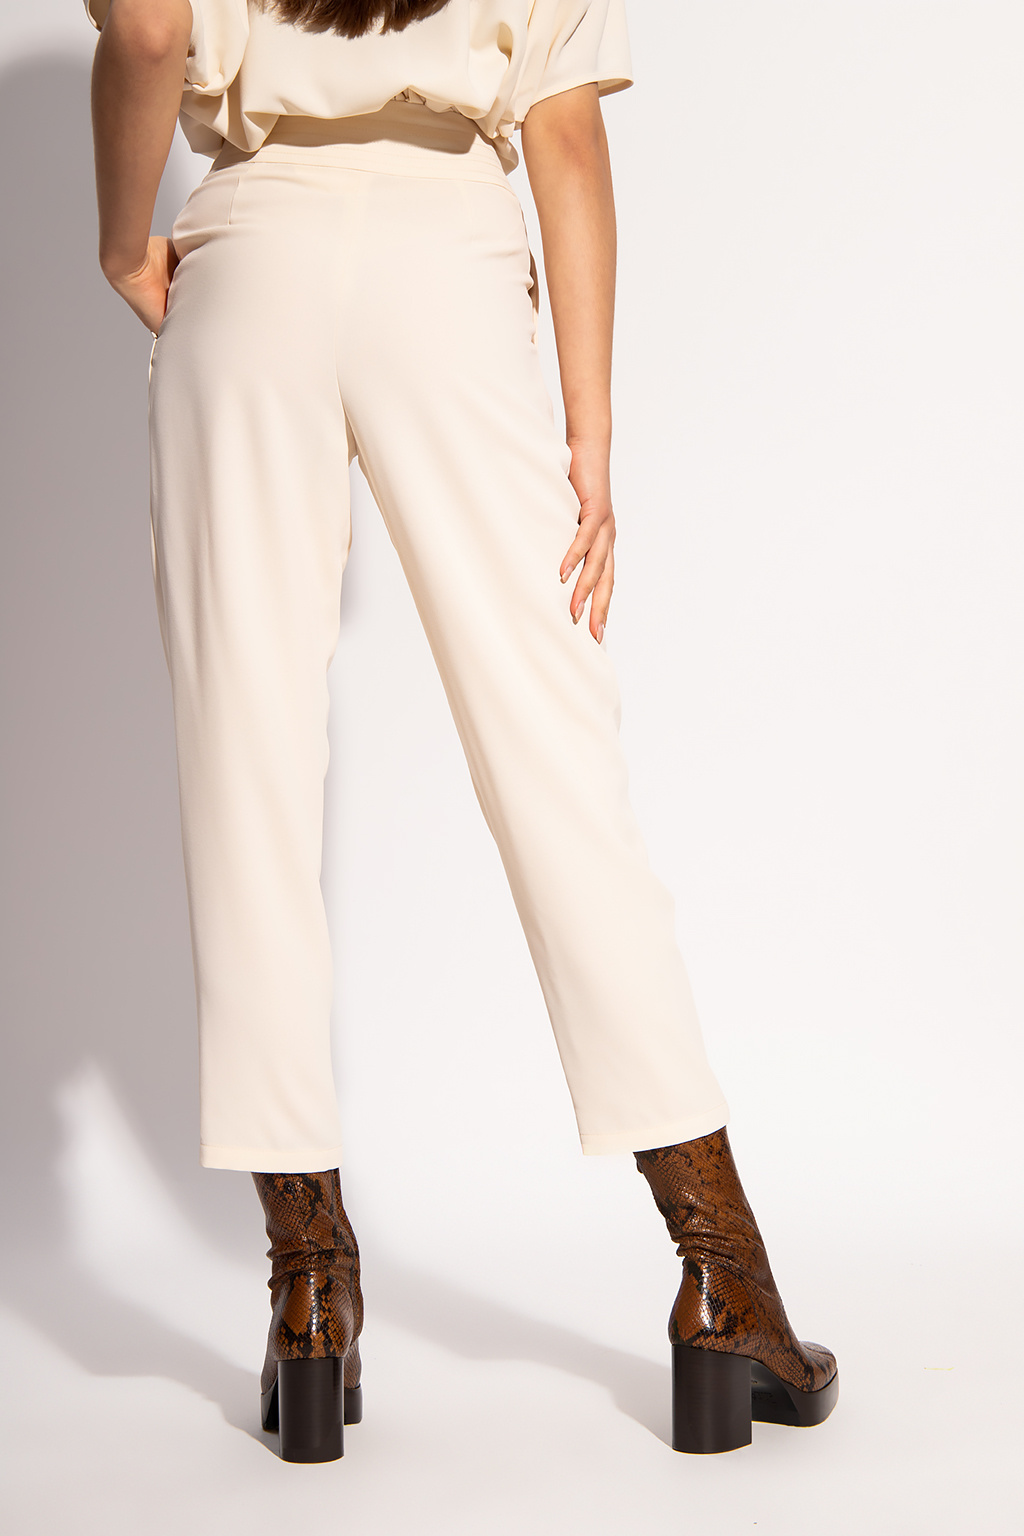 See By Chloe High-waisted light trousers